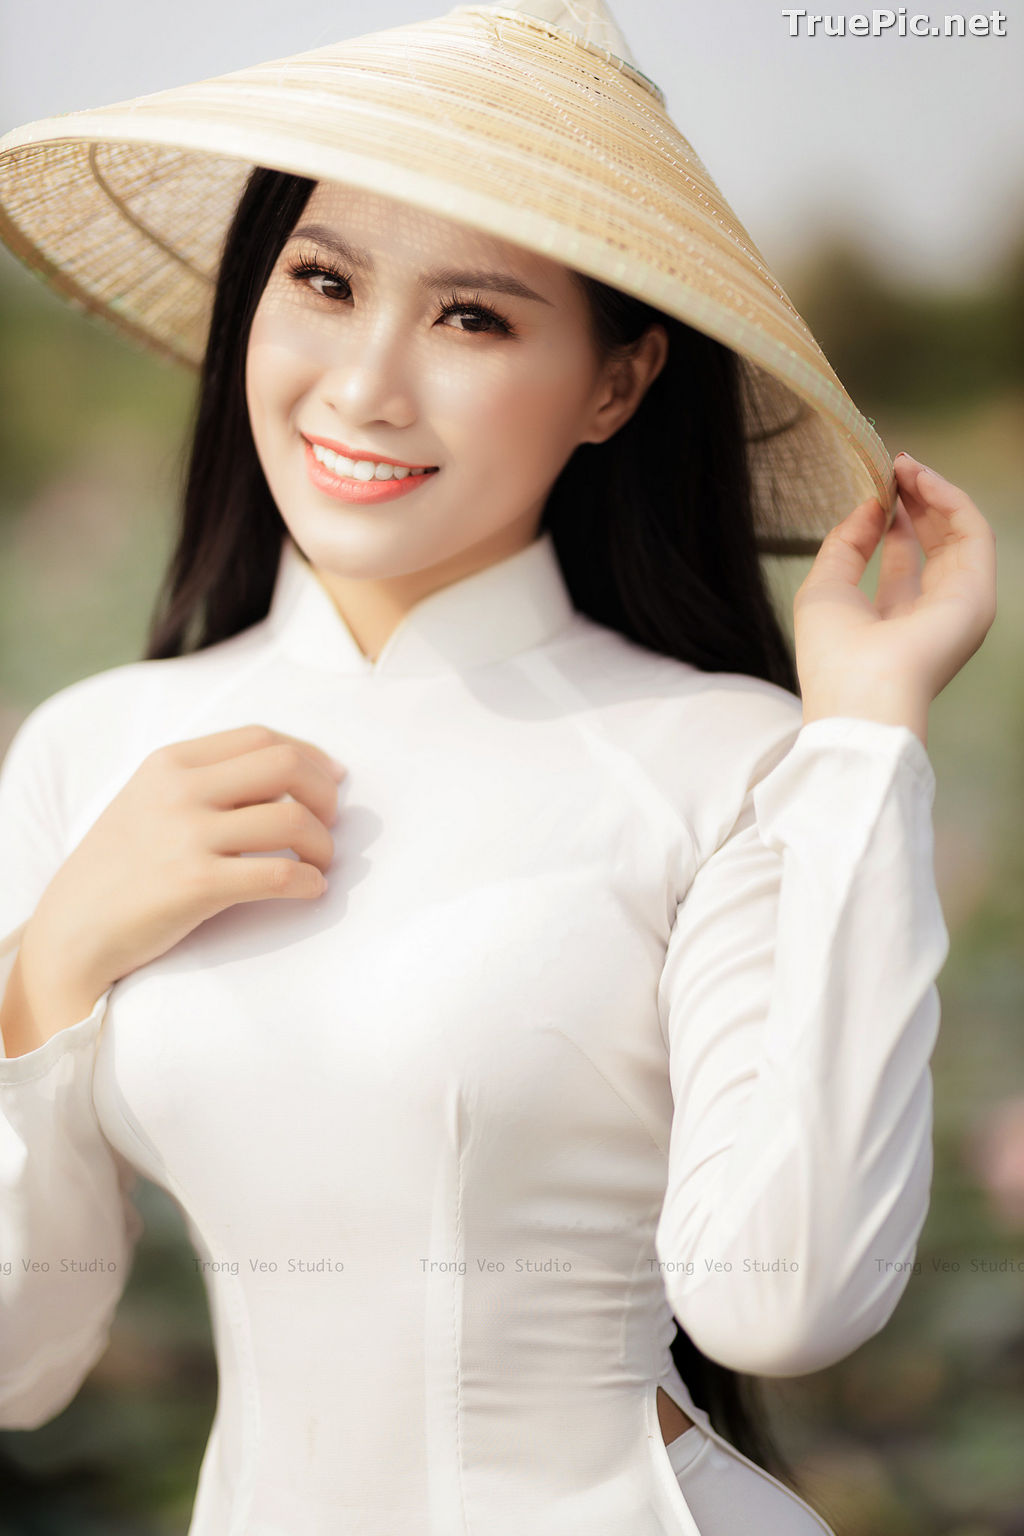 Image The Beauty of Vietnamese Girls with Traditional Dress (Ao Dai) #3 - TruePic.net - Picture-66